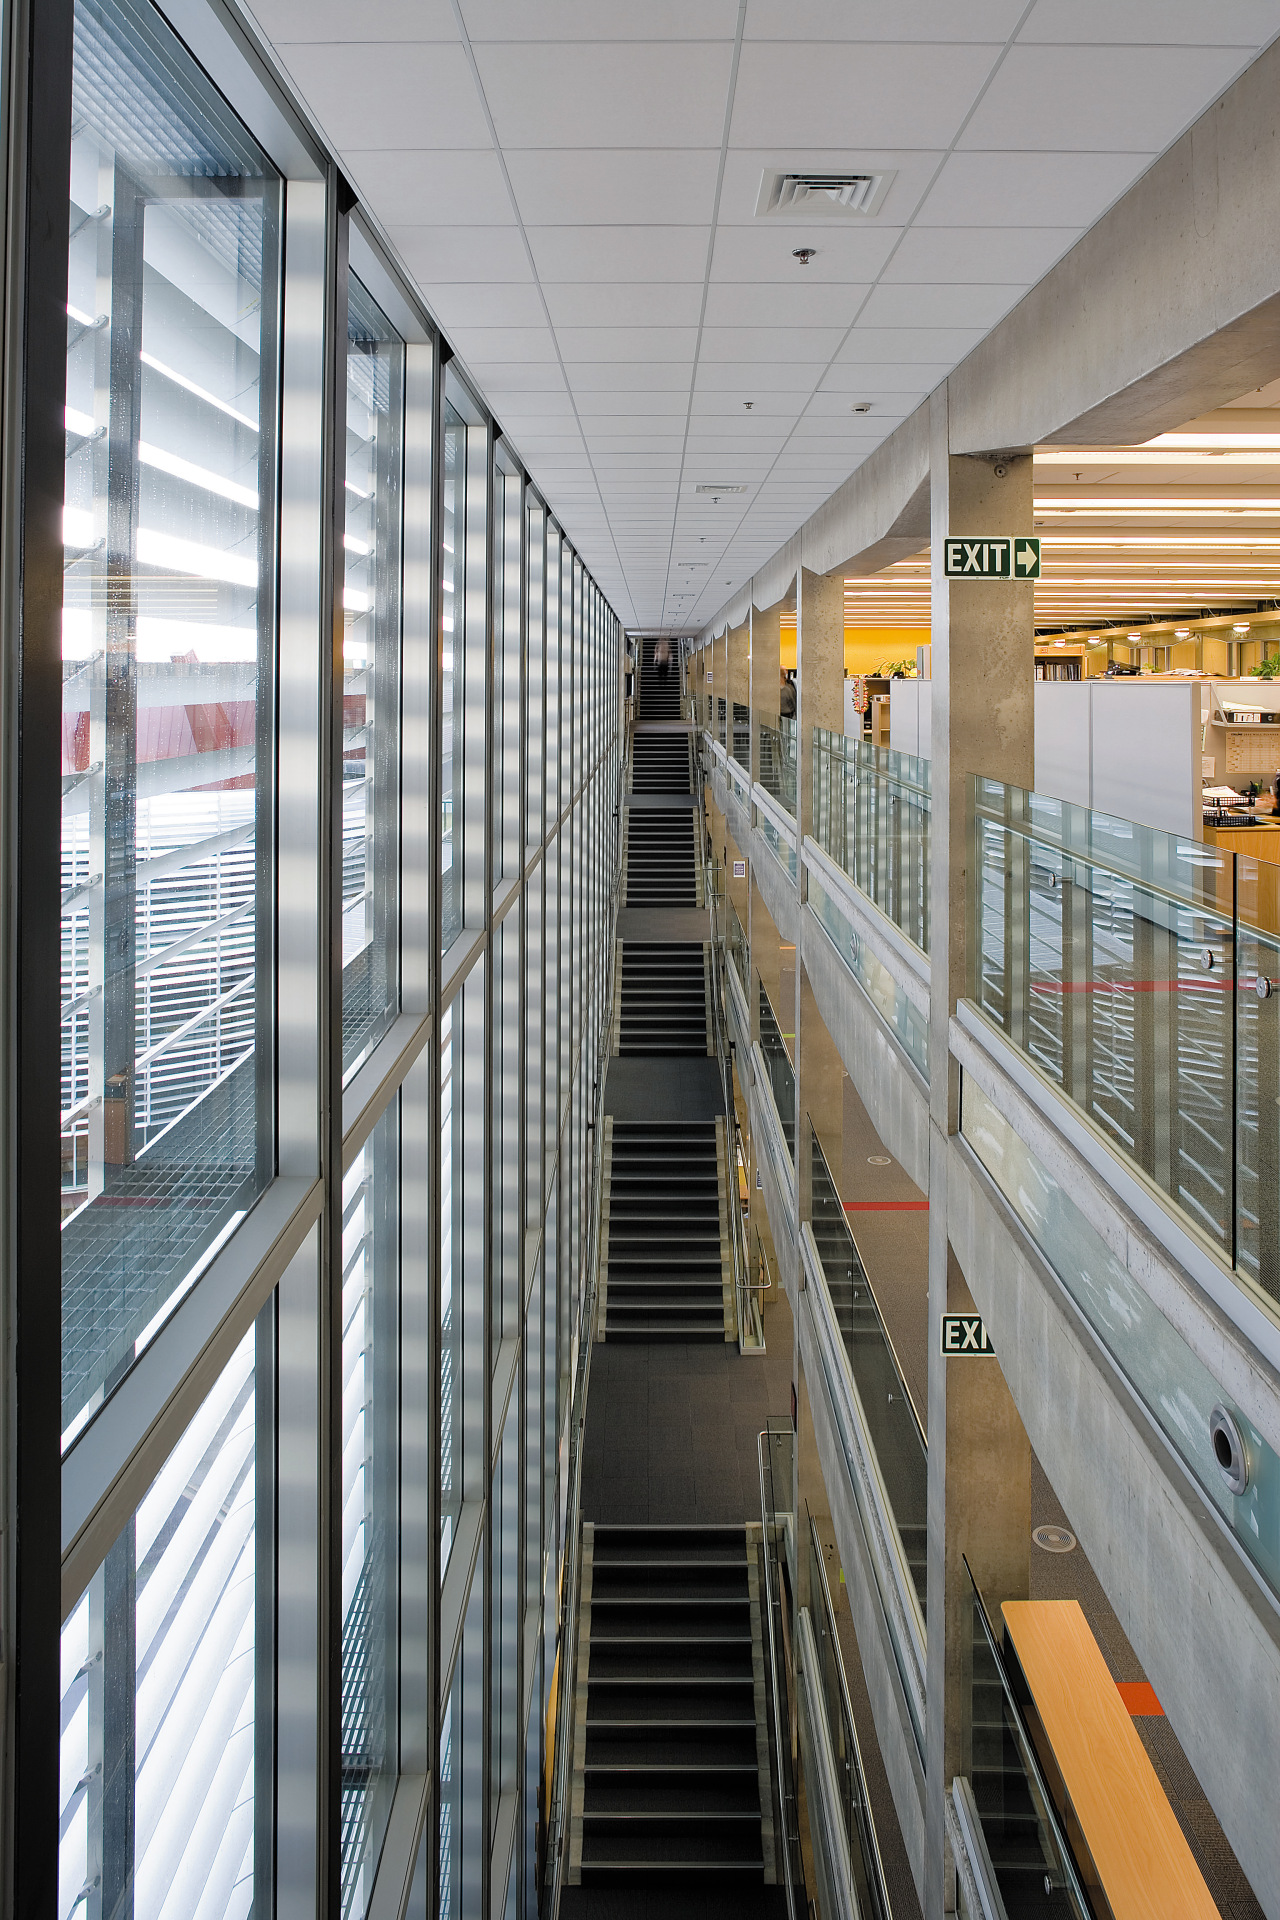 A interior view of the Waitakere Civic Centre. architecture, building, daylighting, glass, metropolitan area, gray